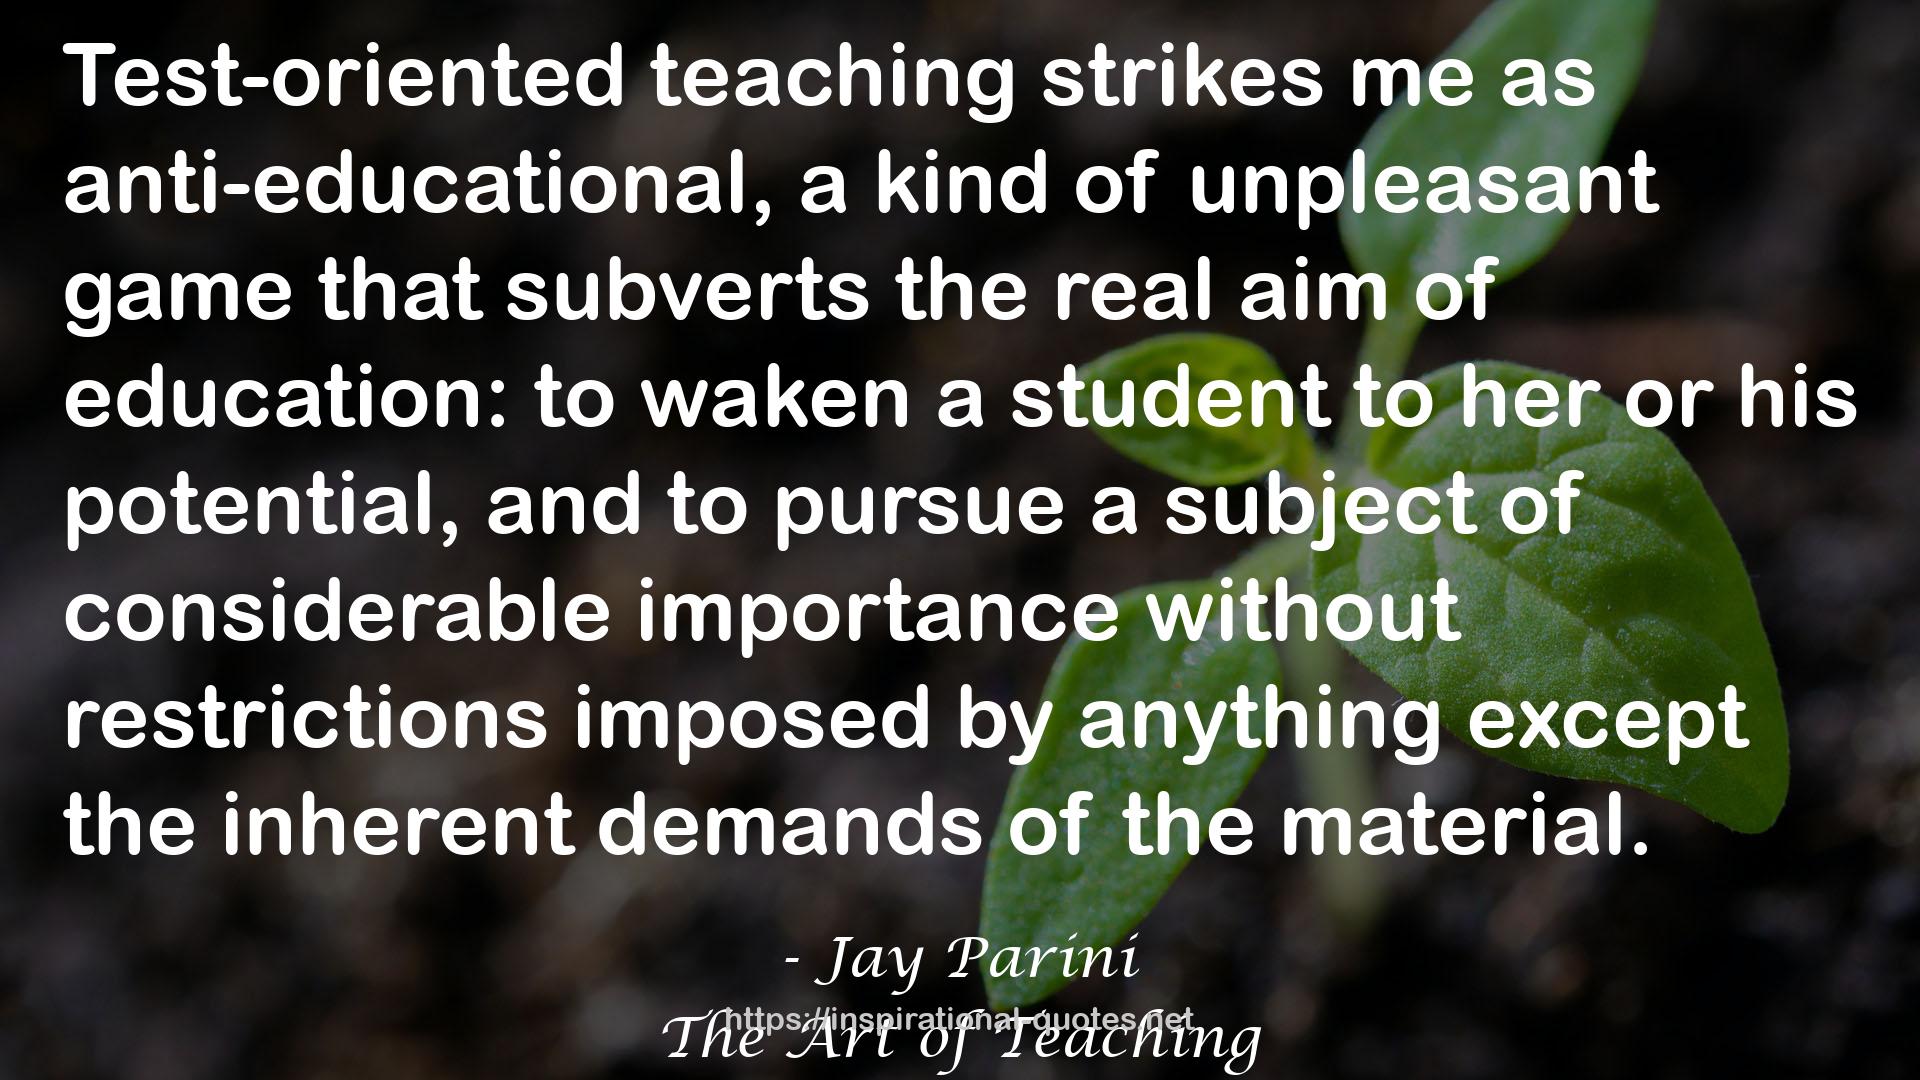 The Art of Teaching QUOTES